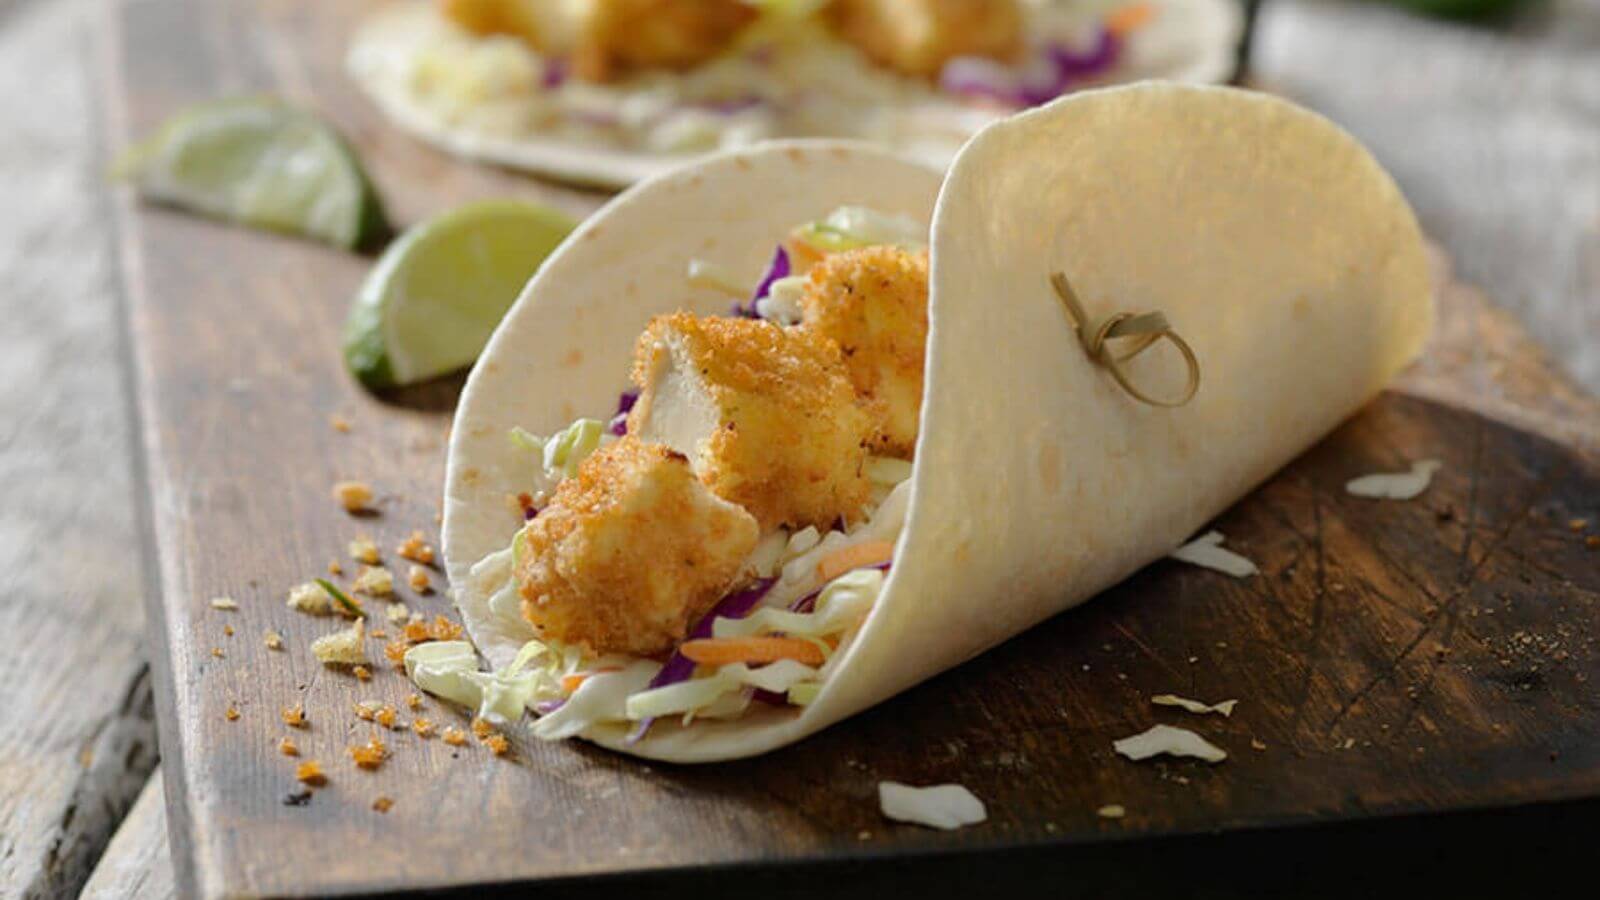 soft taco shell filled with crispy tofu pieces and coleslaw mix